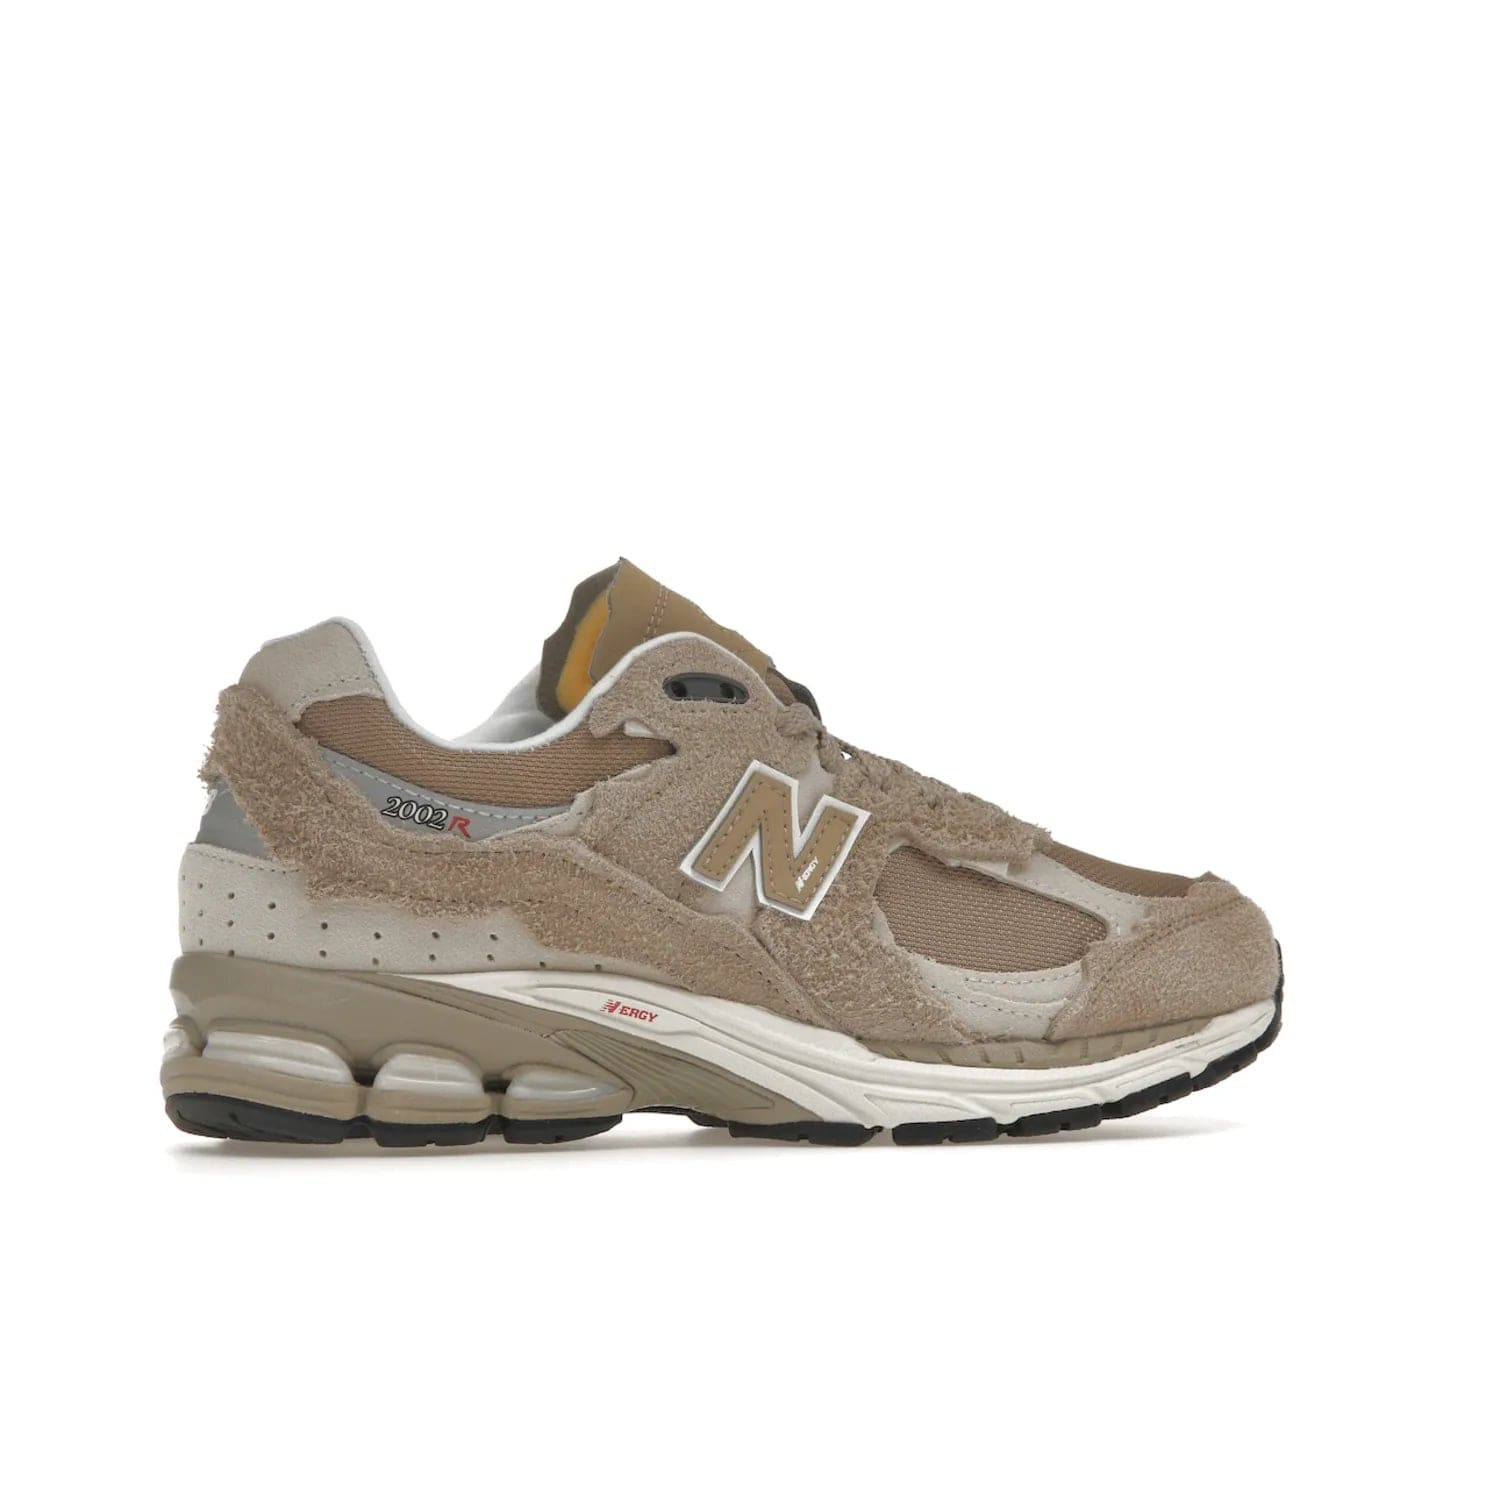 New Balance 2002R Protection Pack Driftwood - Image 35 - Only at www.BallersClubKickz.com - The New Balance 2002R Driftwood Protection Pack is a fashionable yet comfortable sneaker perfect for any occasion. Features include hairy suede uppers, breathable mesh, underfoot support, 3M reflective details, and more. Stylishly dress up your look with this shoe, available March 2023.